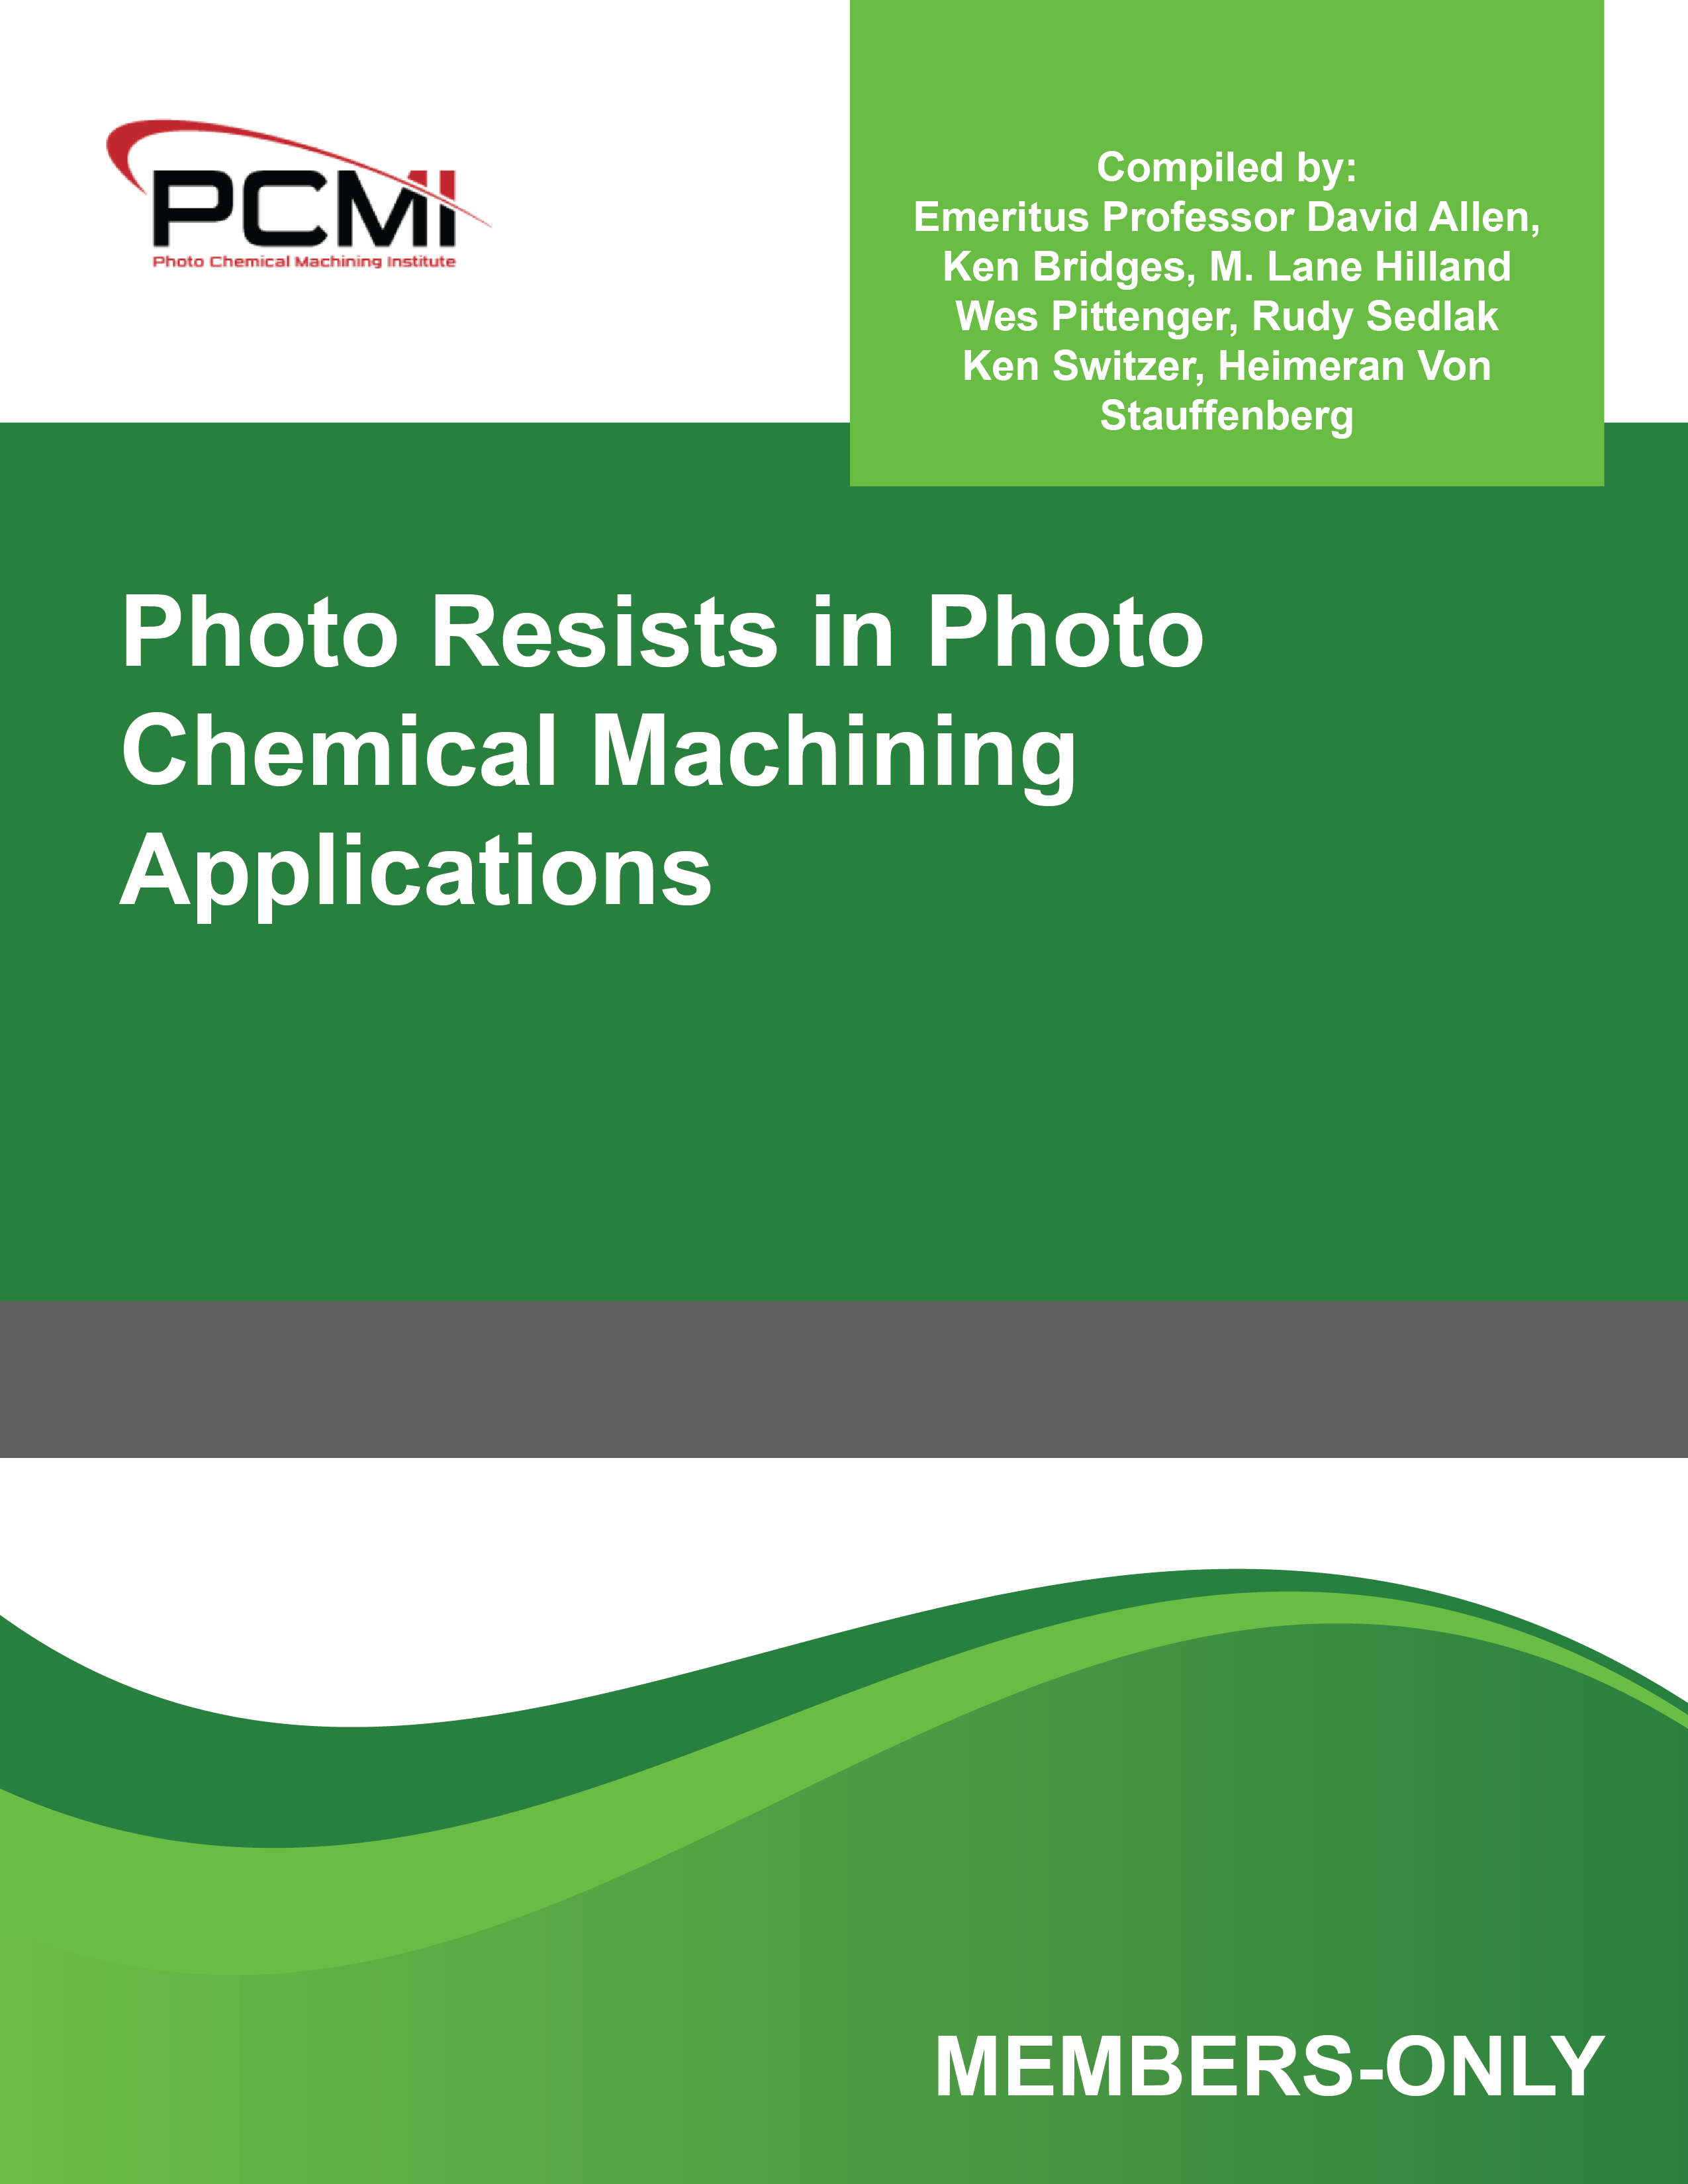 Photo Resists in Photo Chemical Machining Applications